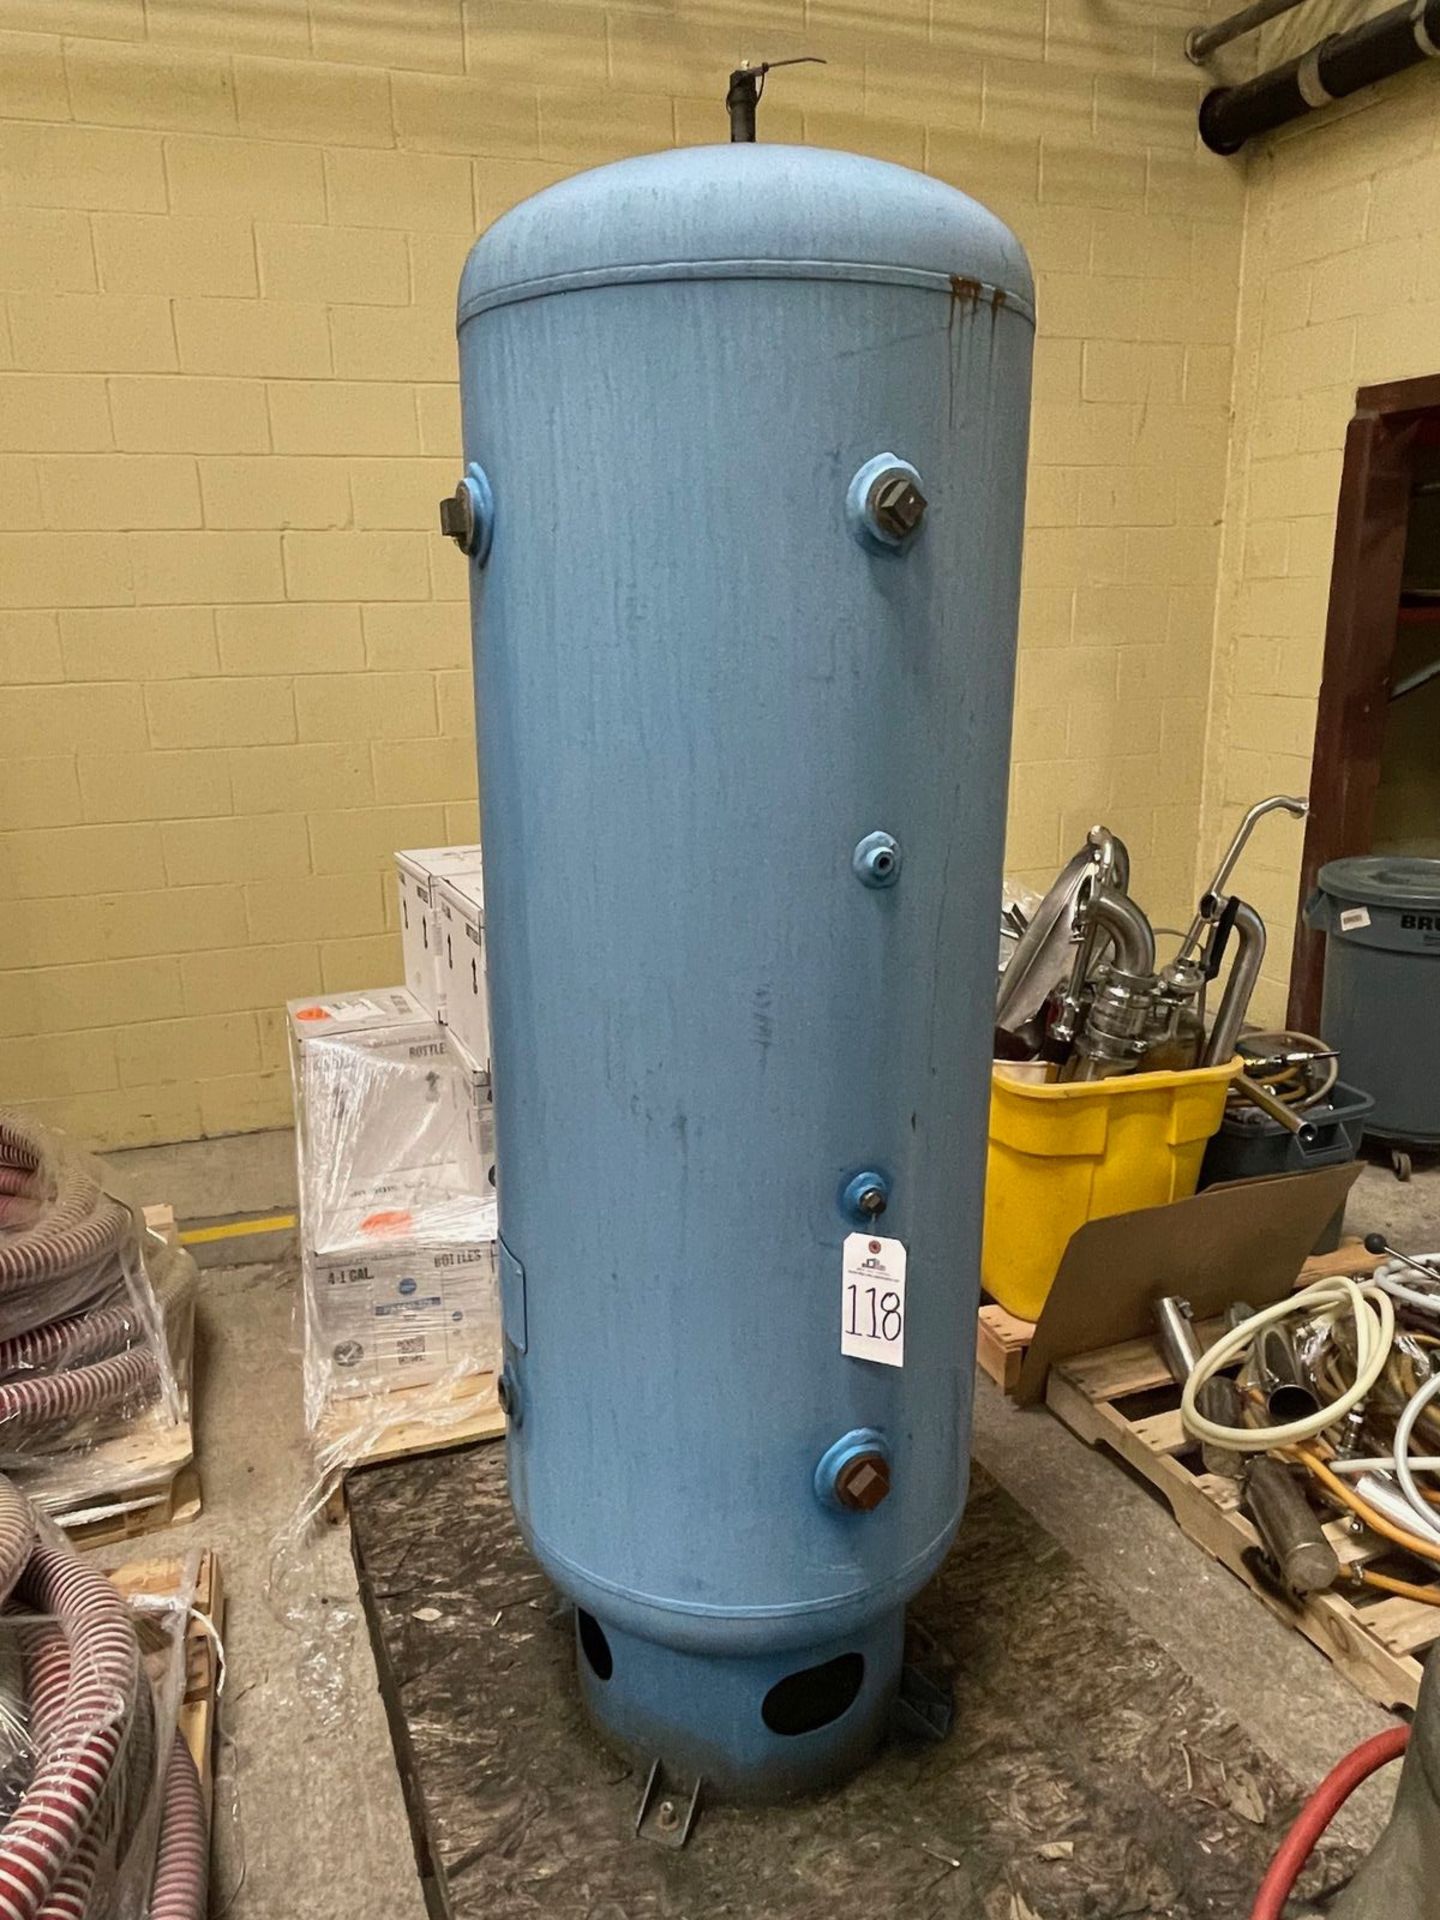 120 GALLON MANCHESTER COMPRESSED AIR TANK, 200 PSI, 2003, S/N 32580 | Rig Fee: 200